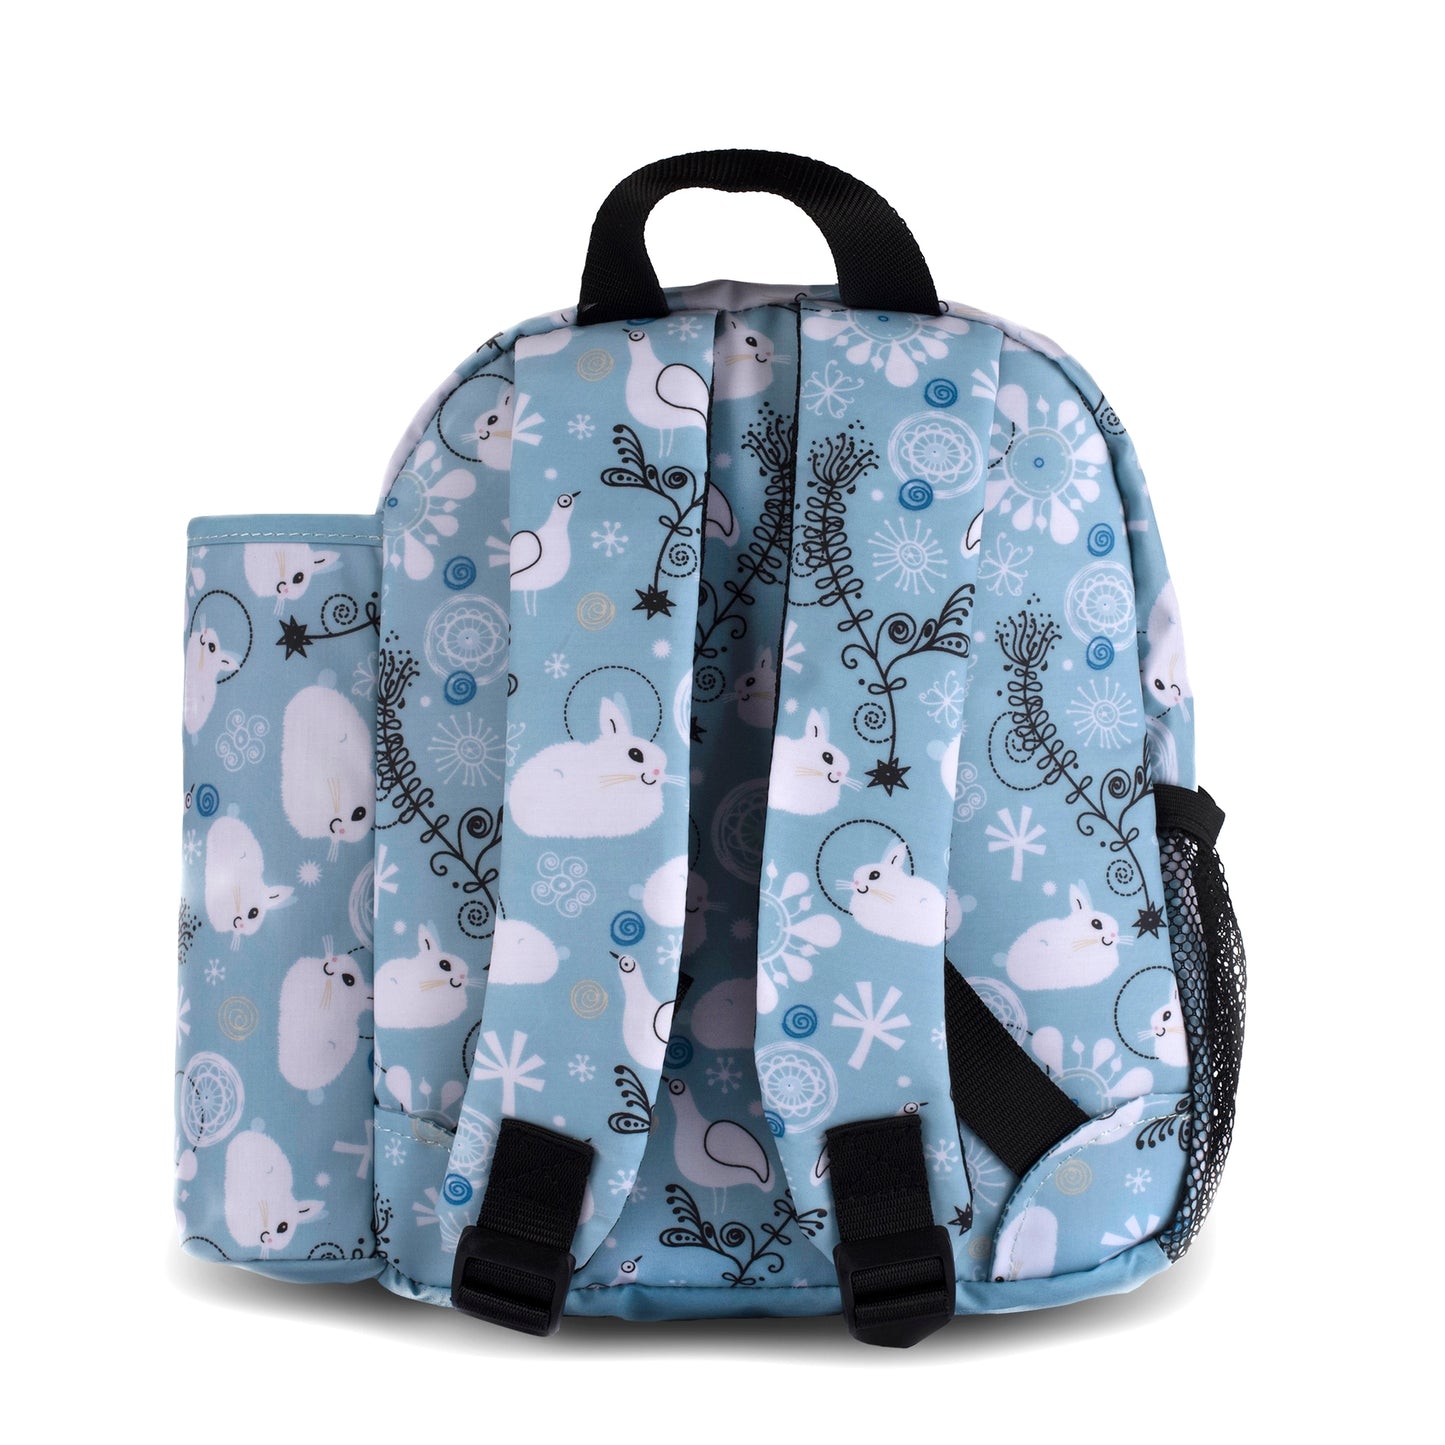 Urban Infant Packie Toddler Backpack - Bunnies